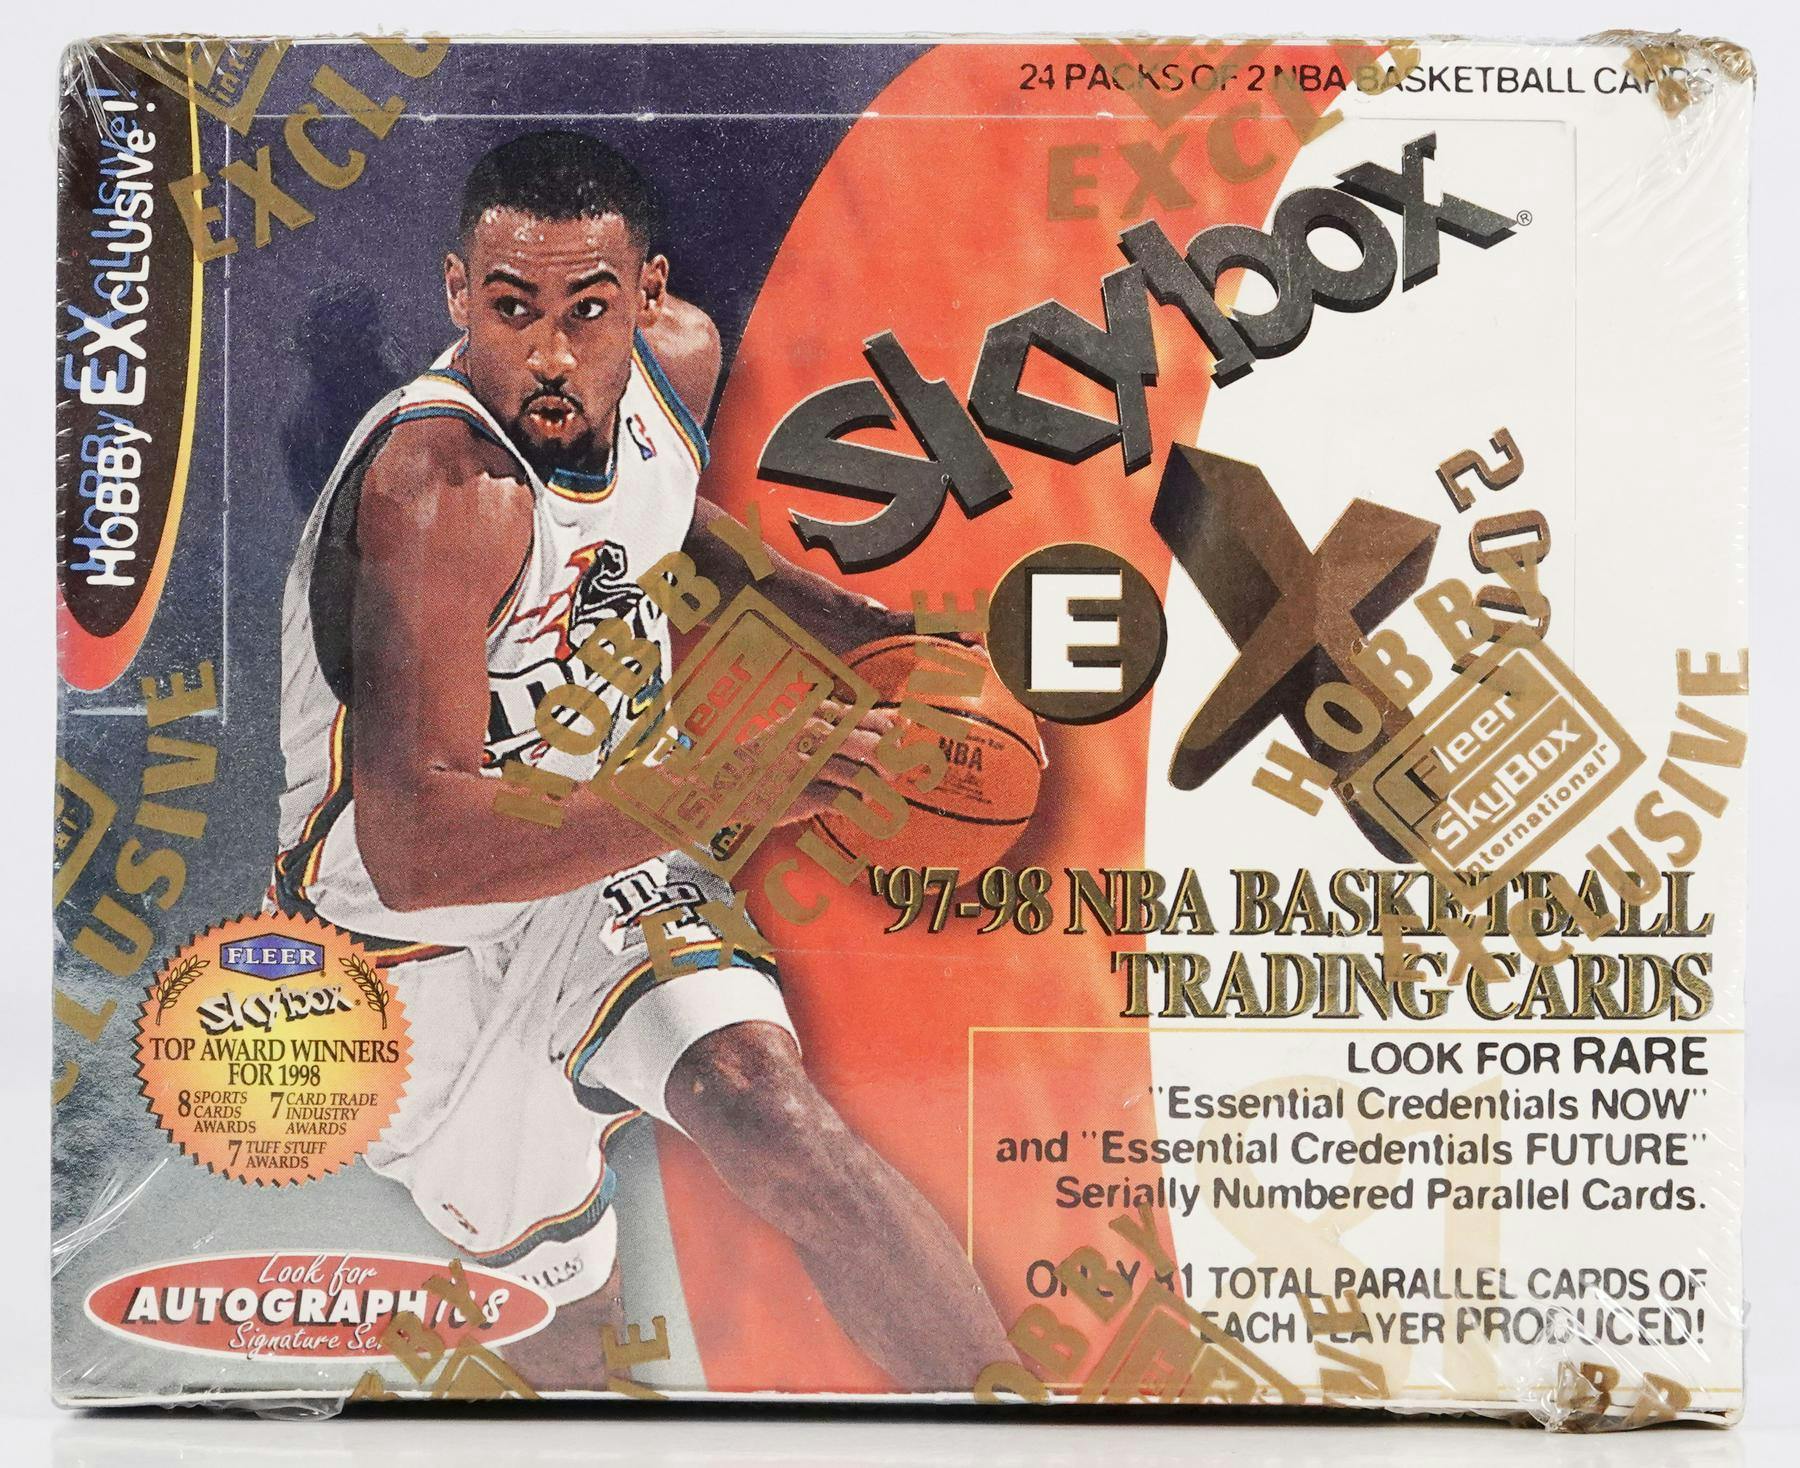 1997 Press Pass Autographs Basketball Card Set - VCP Price Guide